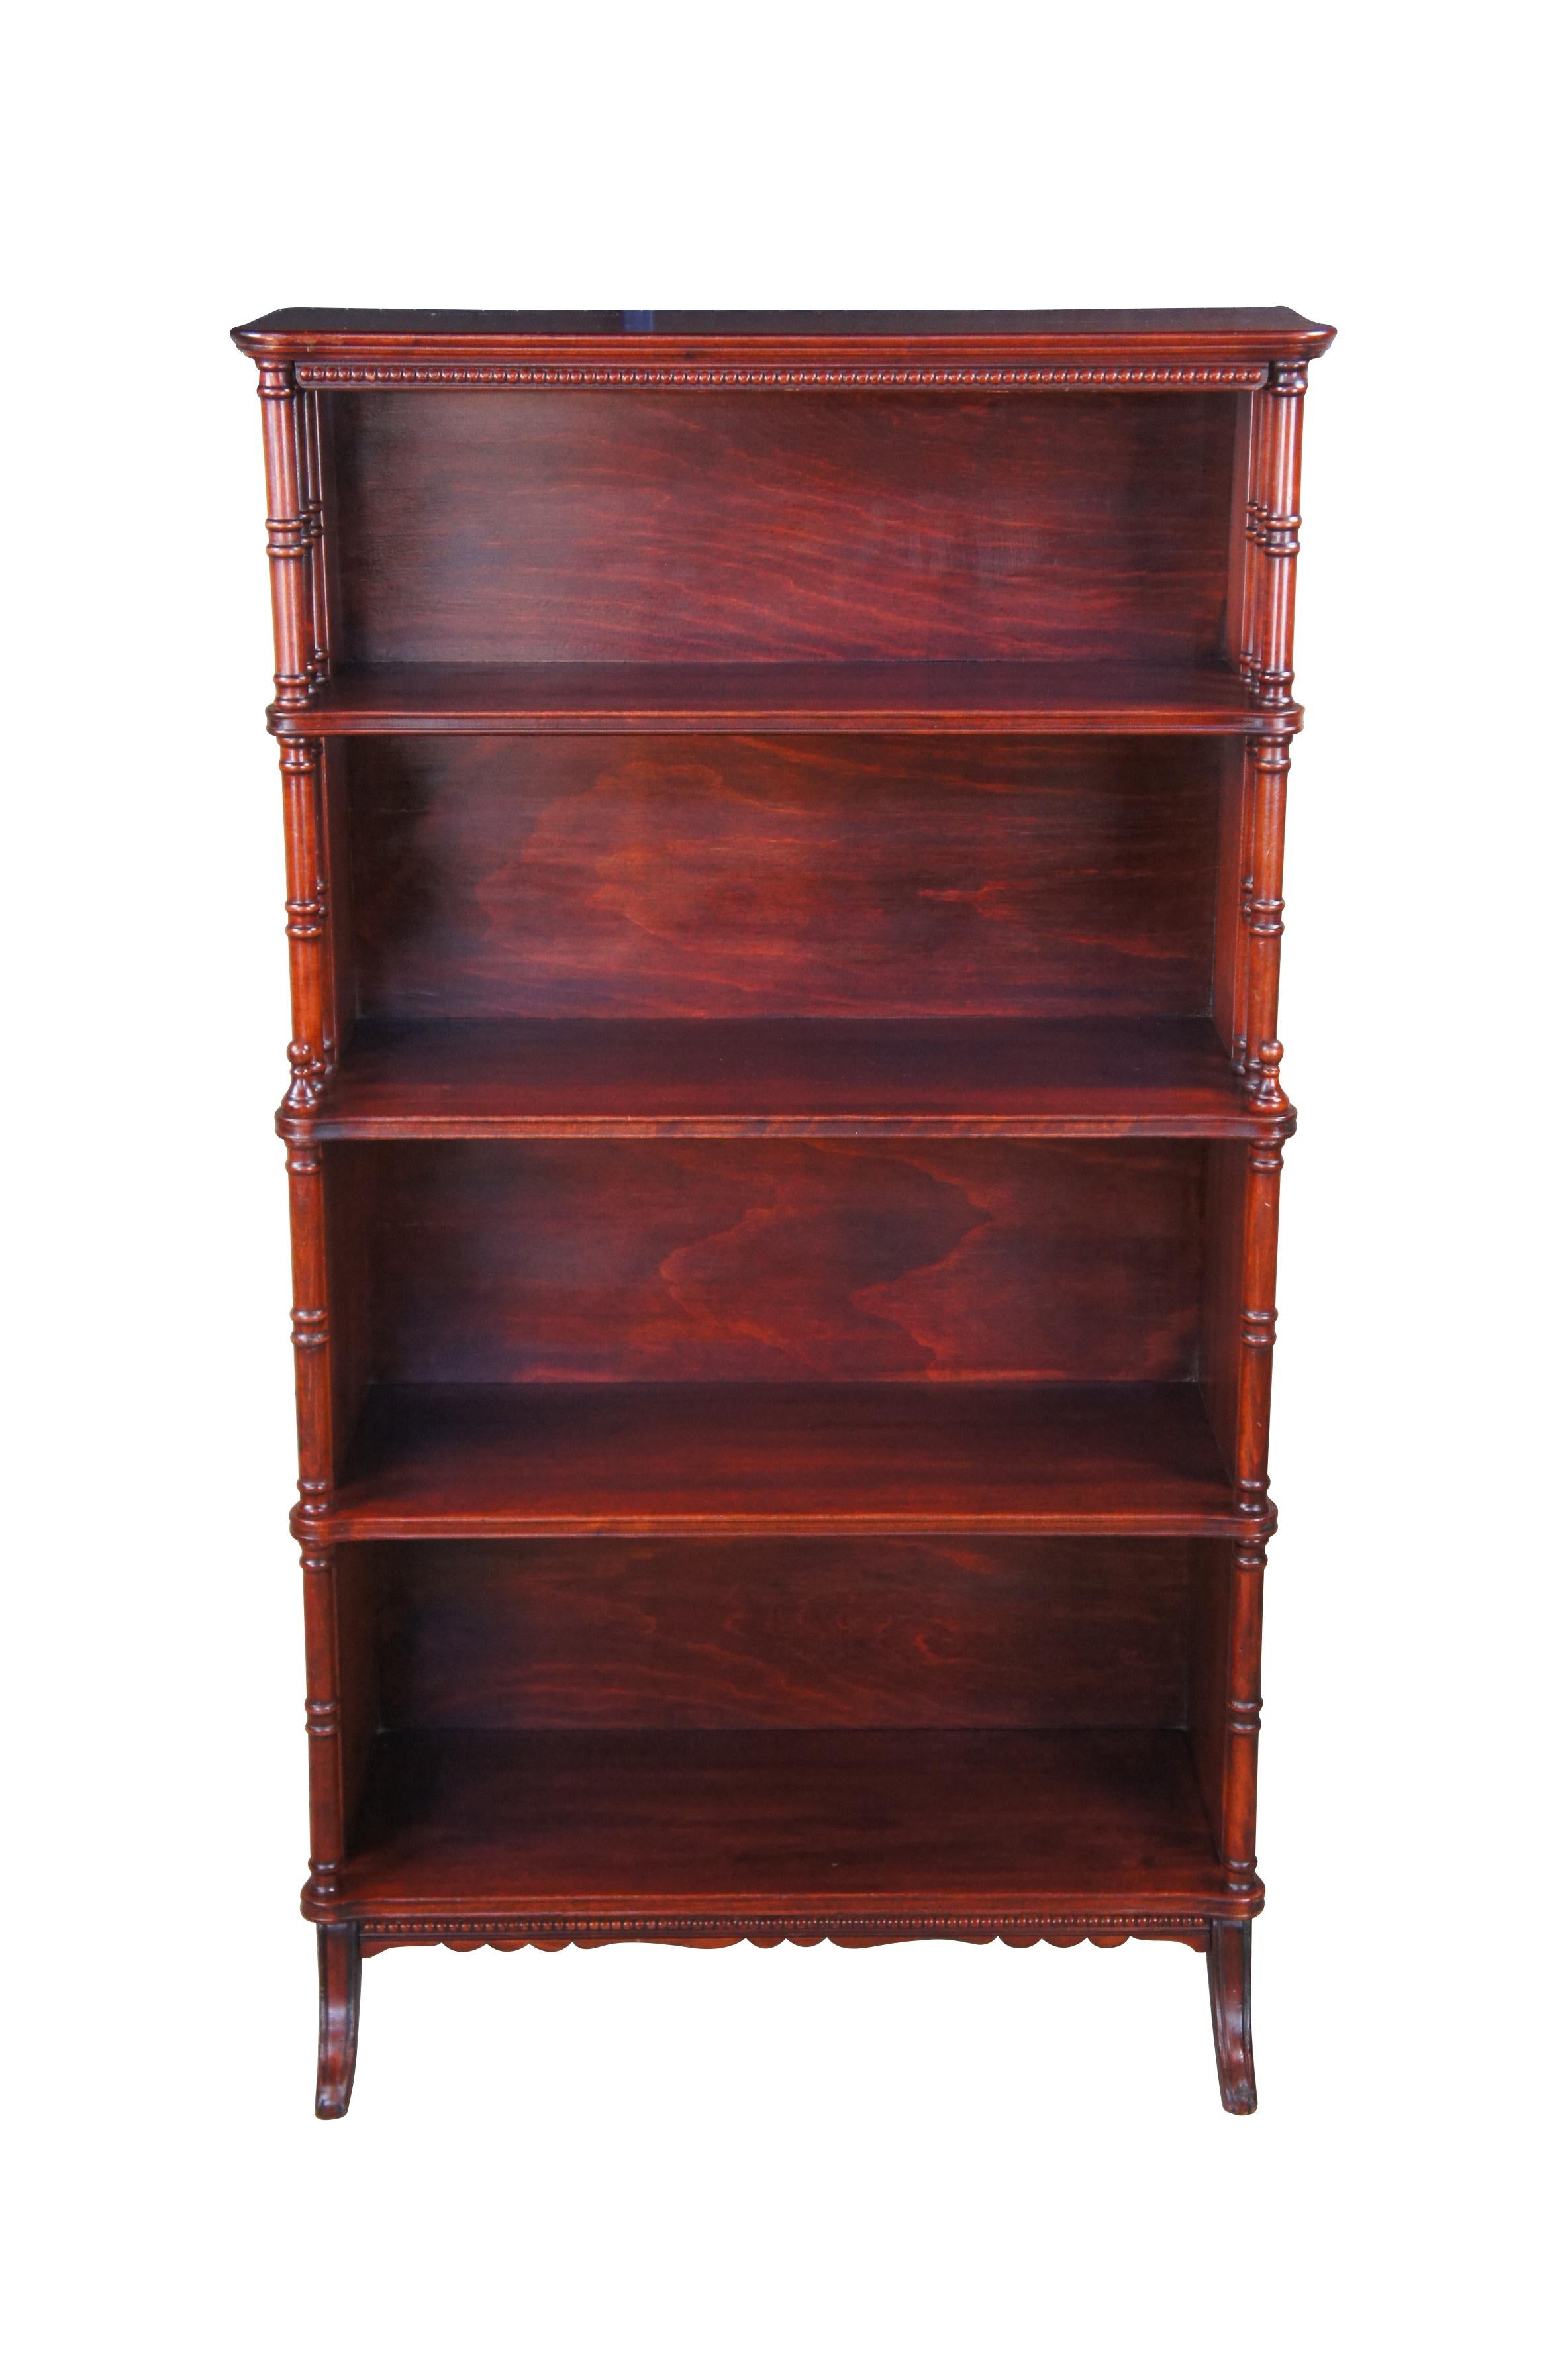 Sheraton Antique Mahogany 4 Shelf Library Office Bookcase Etagere Book Stand 50